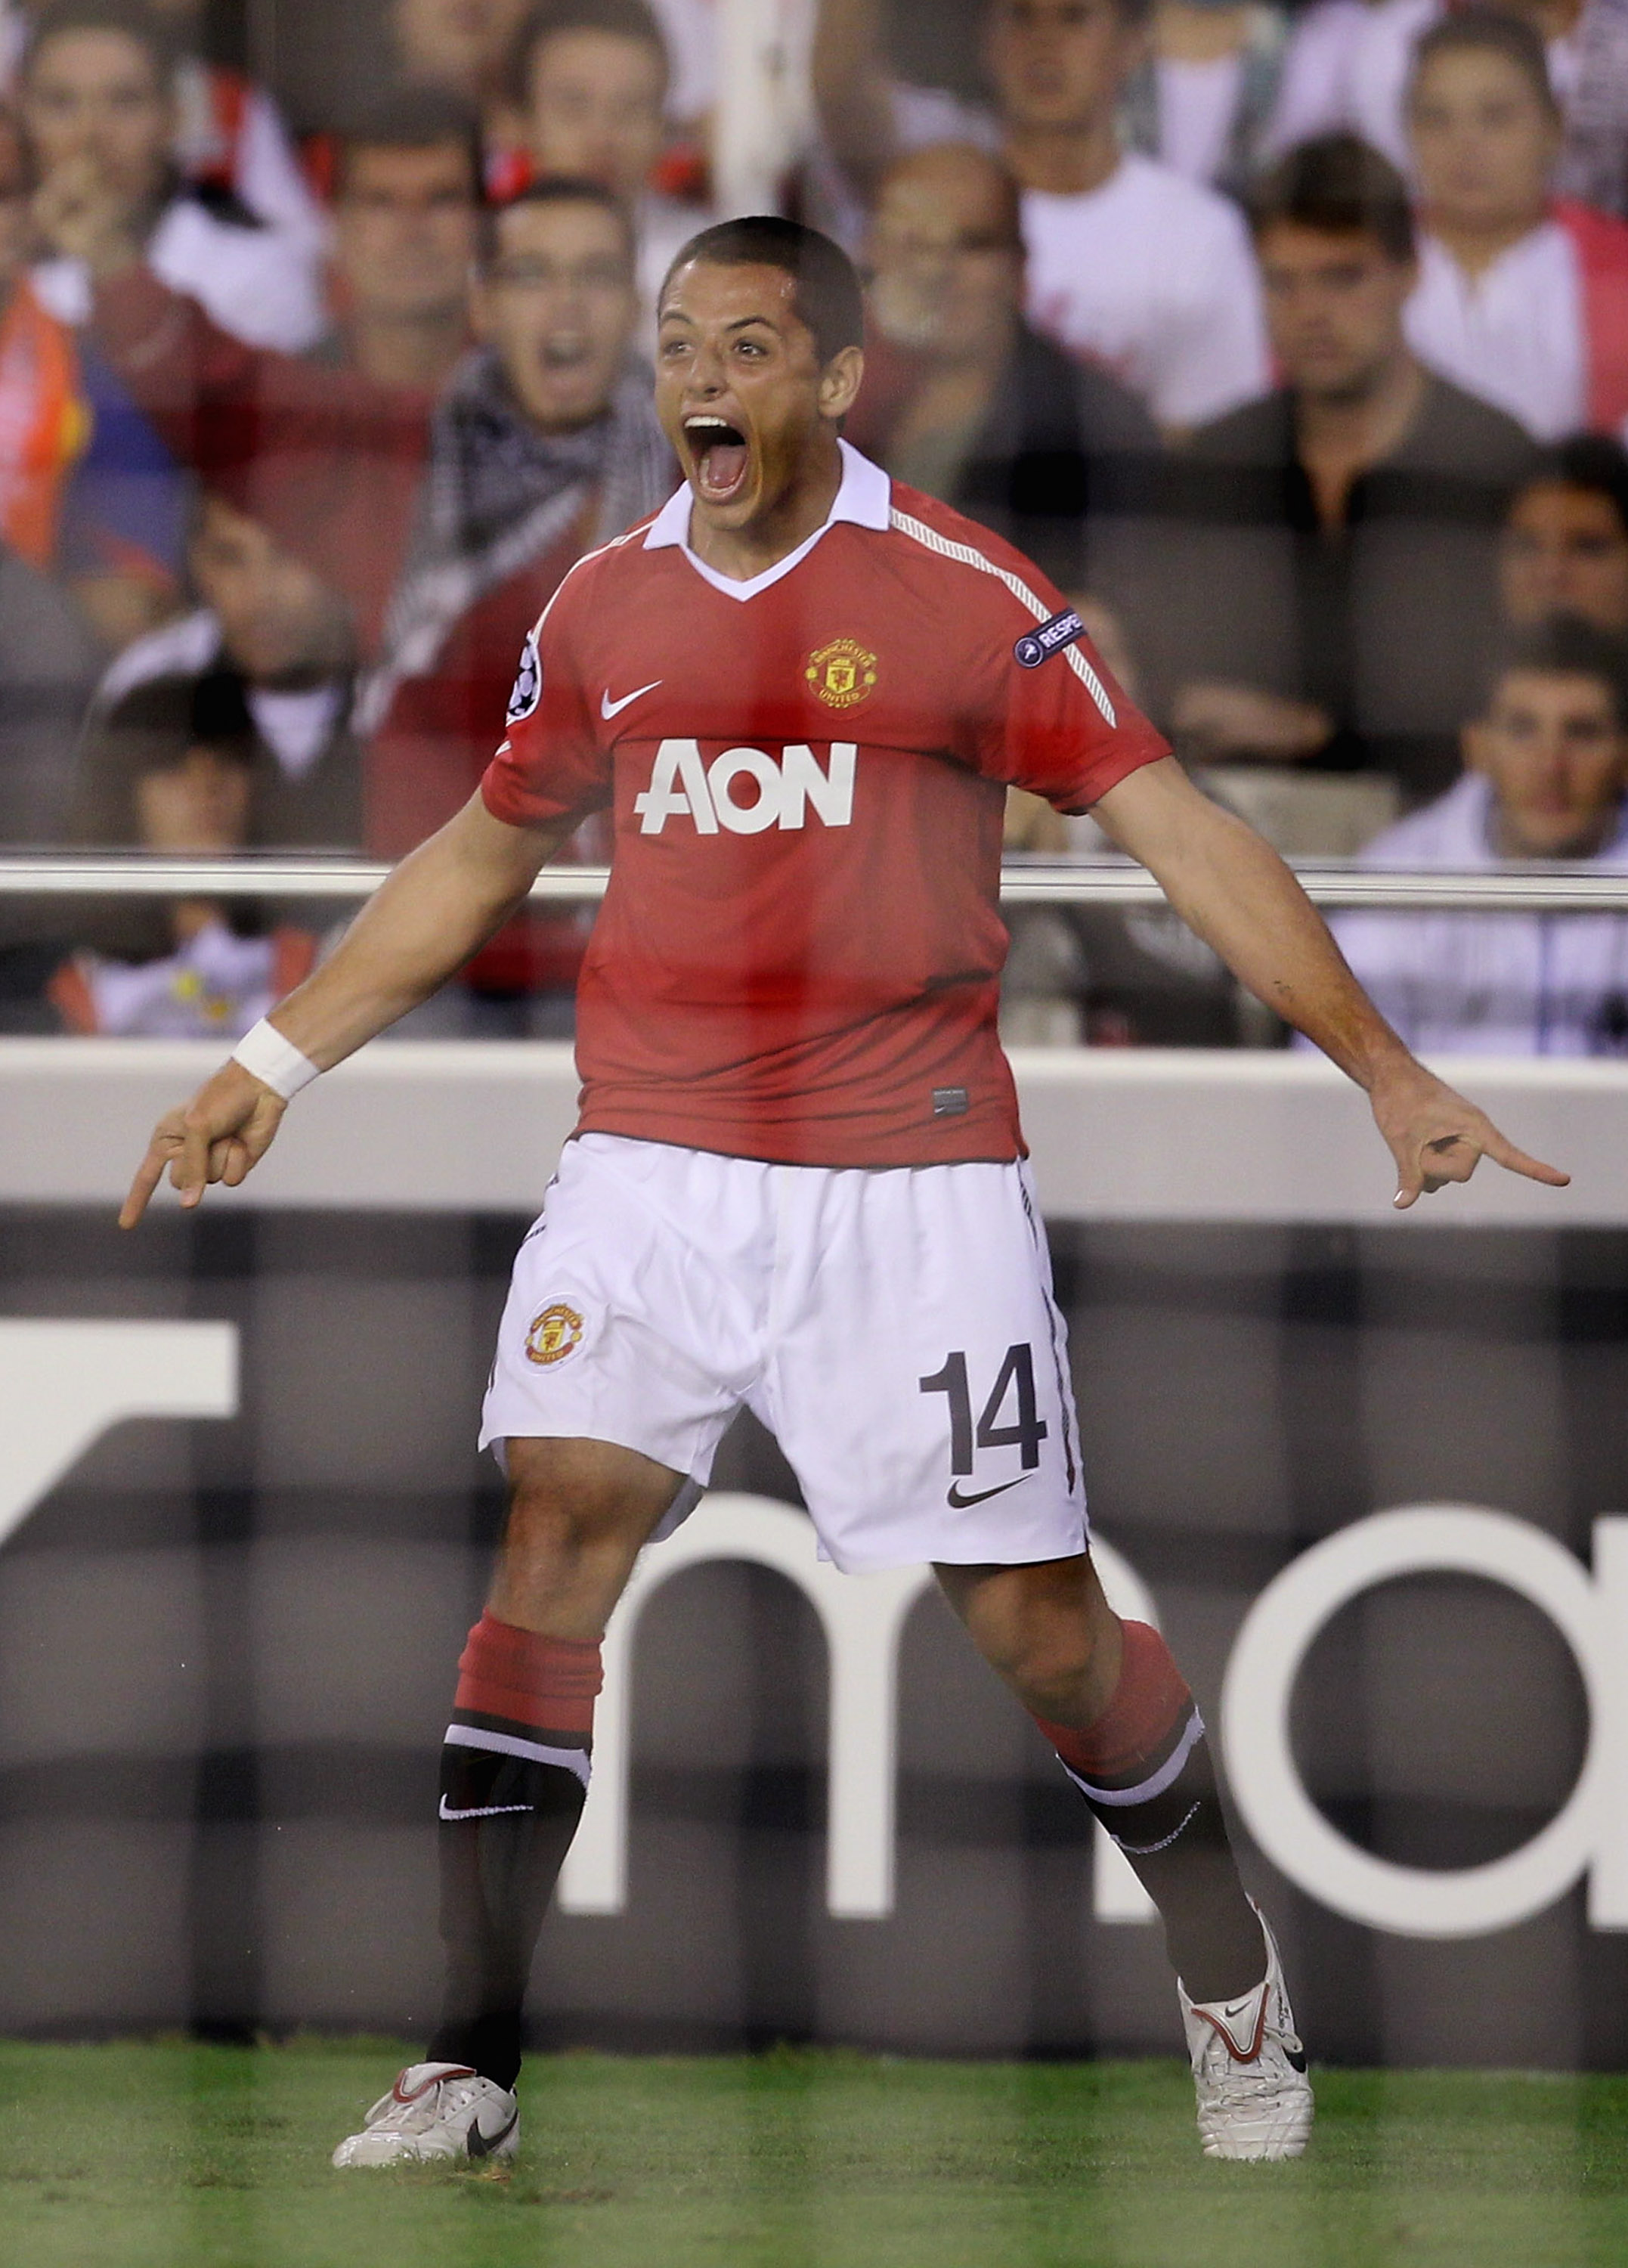 VALENCIA, SPAIN - SEPTEMBER 29:  Javier Hernandez of Manchester United celebrates after scoring the opening goal during the UEFA Champions League Group C match between Valencia and Manchester United at the Mestalla Stadium on September 29, 2010 in Valenci